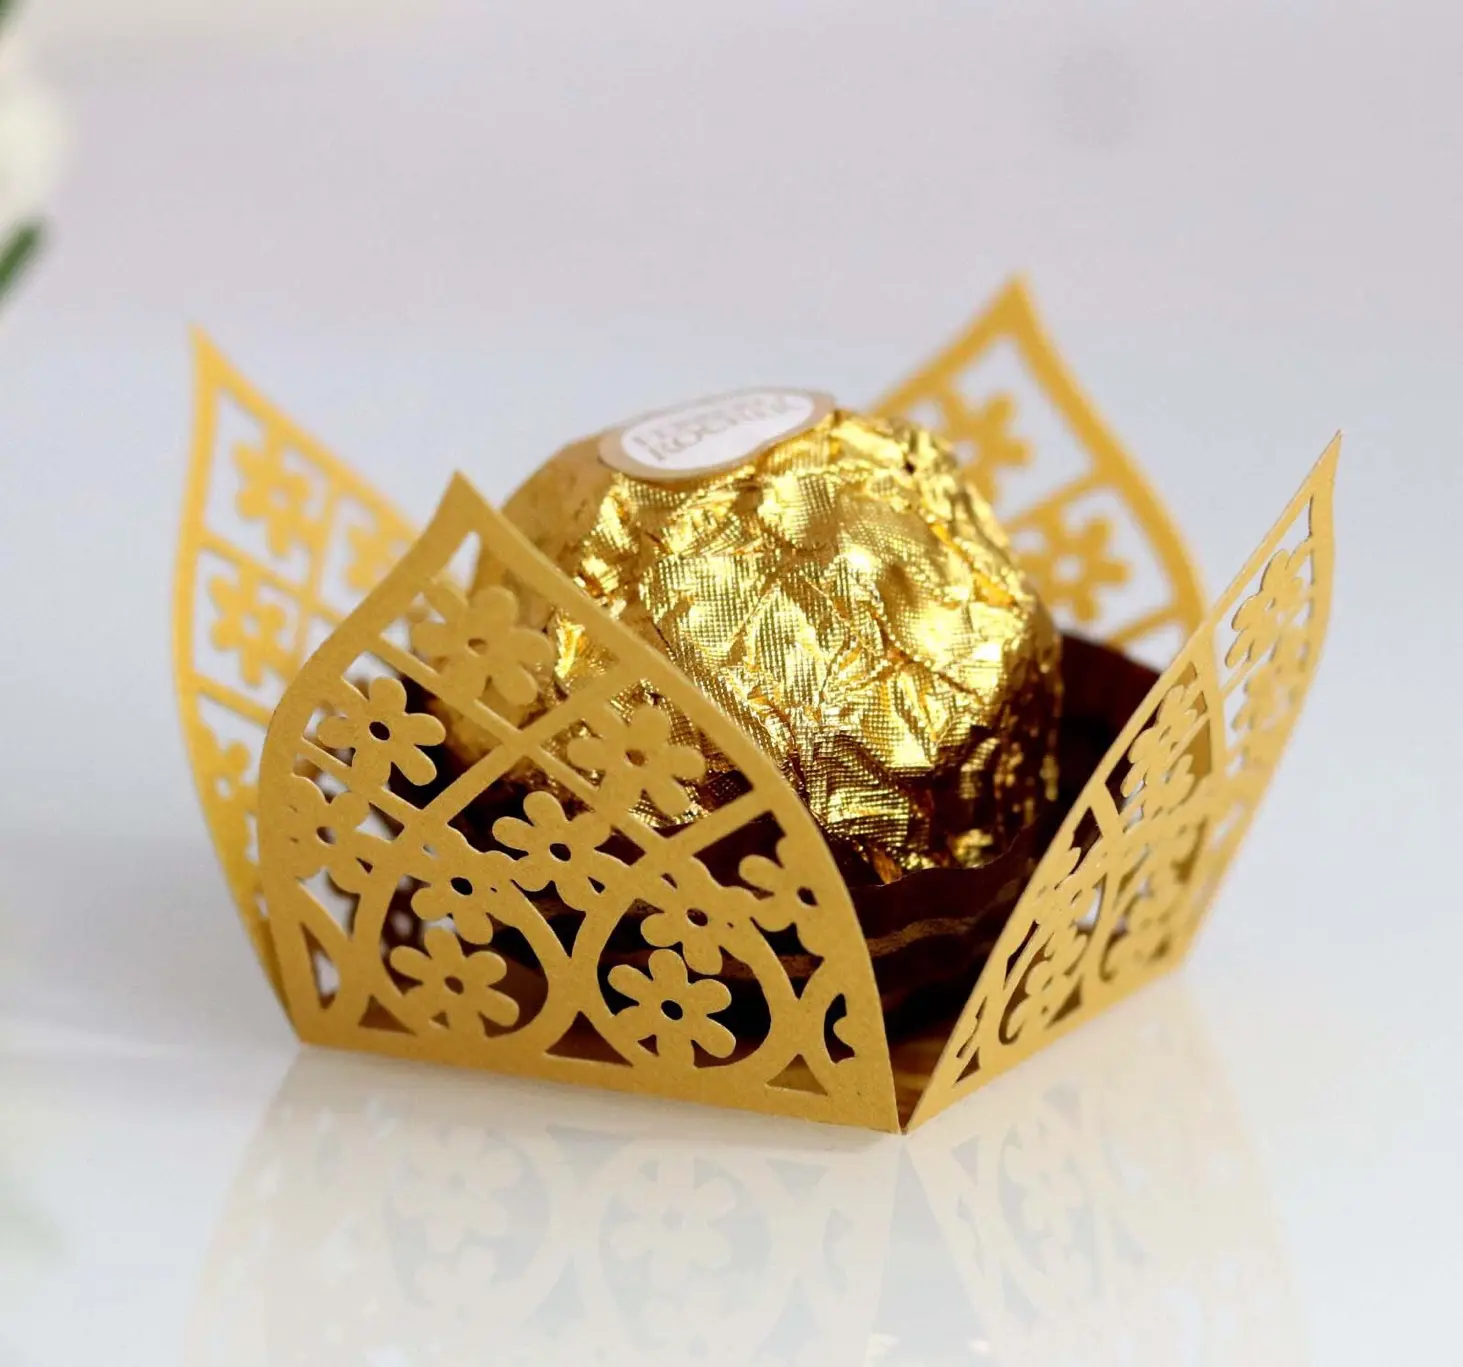 Laser Cut Mexican Chocolate Wrapper Gold Chocolate Box Cake Decorations Chocolate